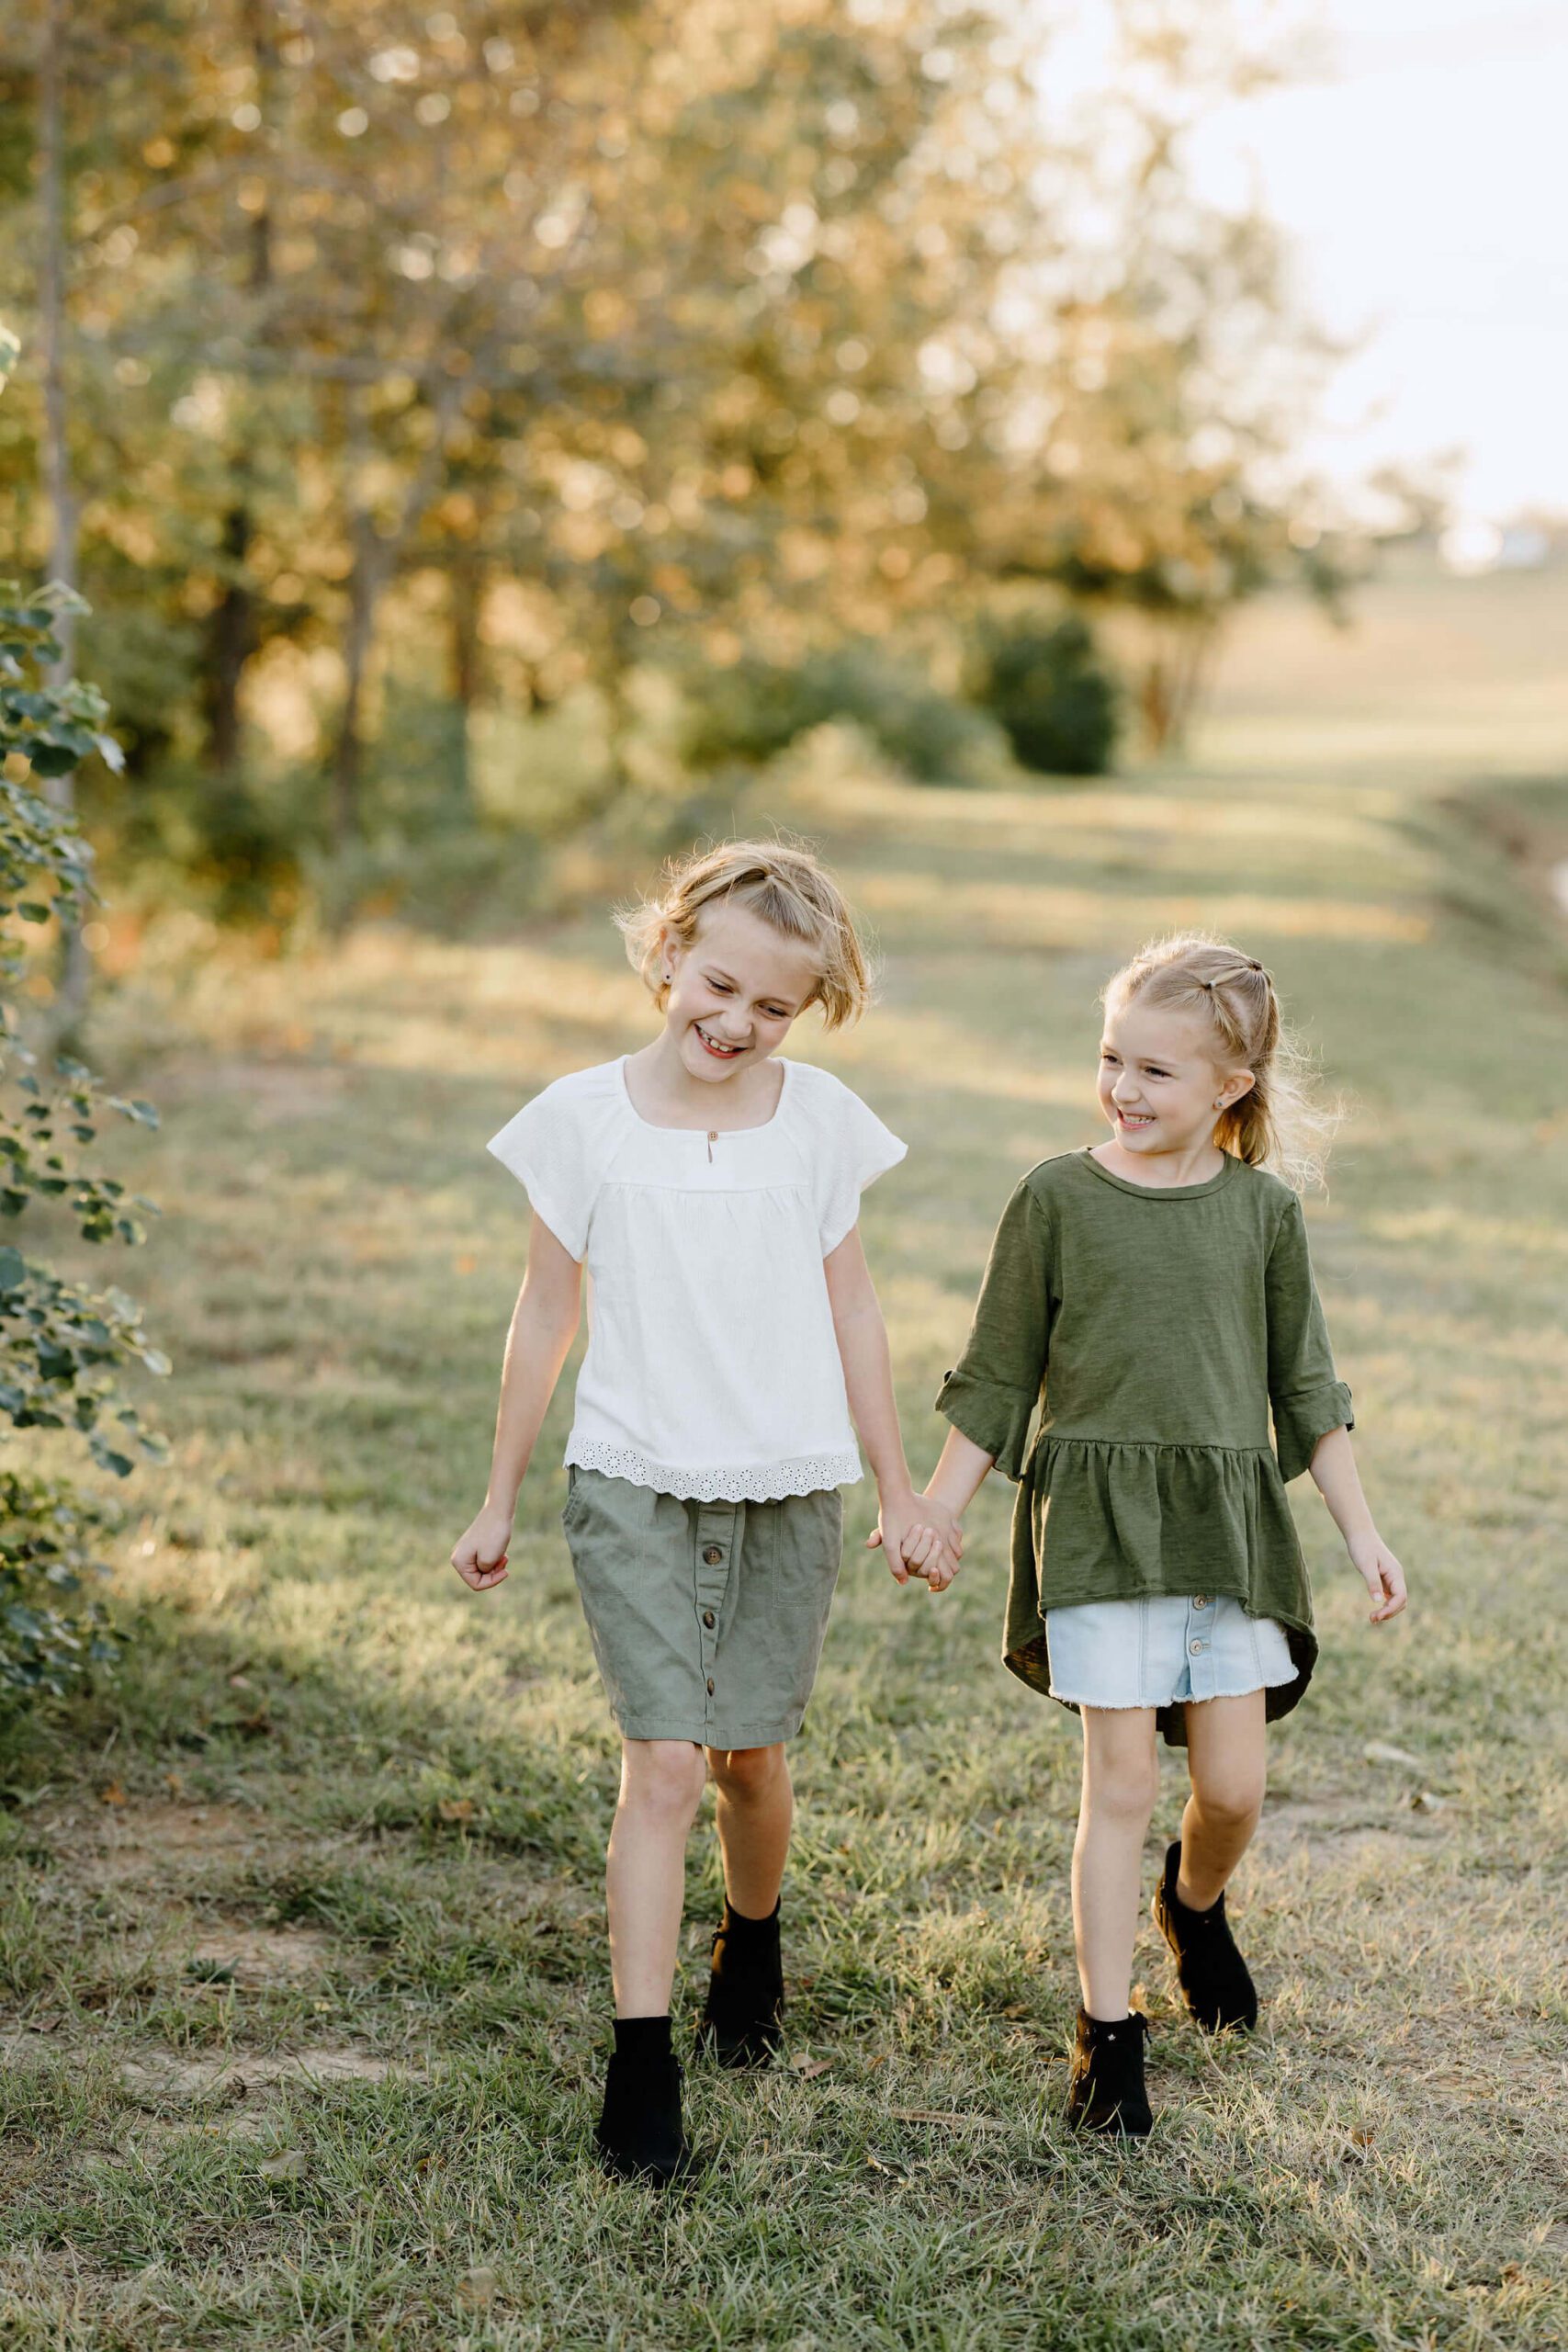 candid family picture of 2 young sisters holding hands and laughing as they walk through an open pasture